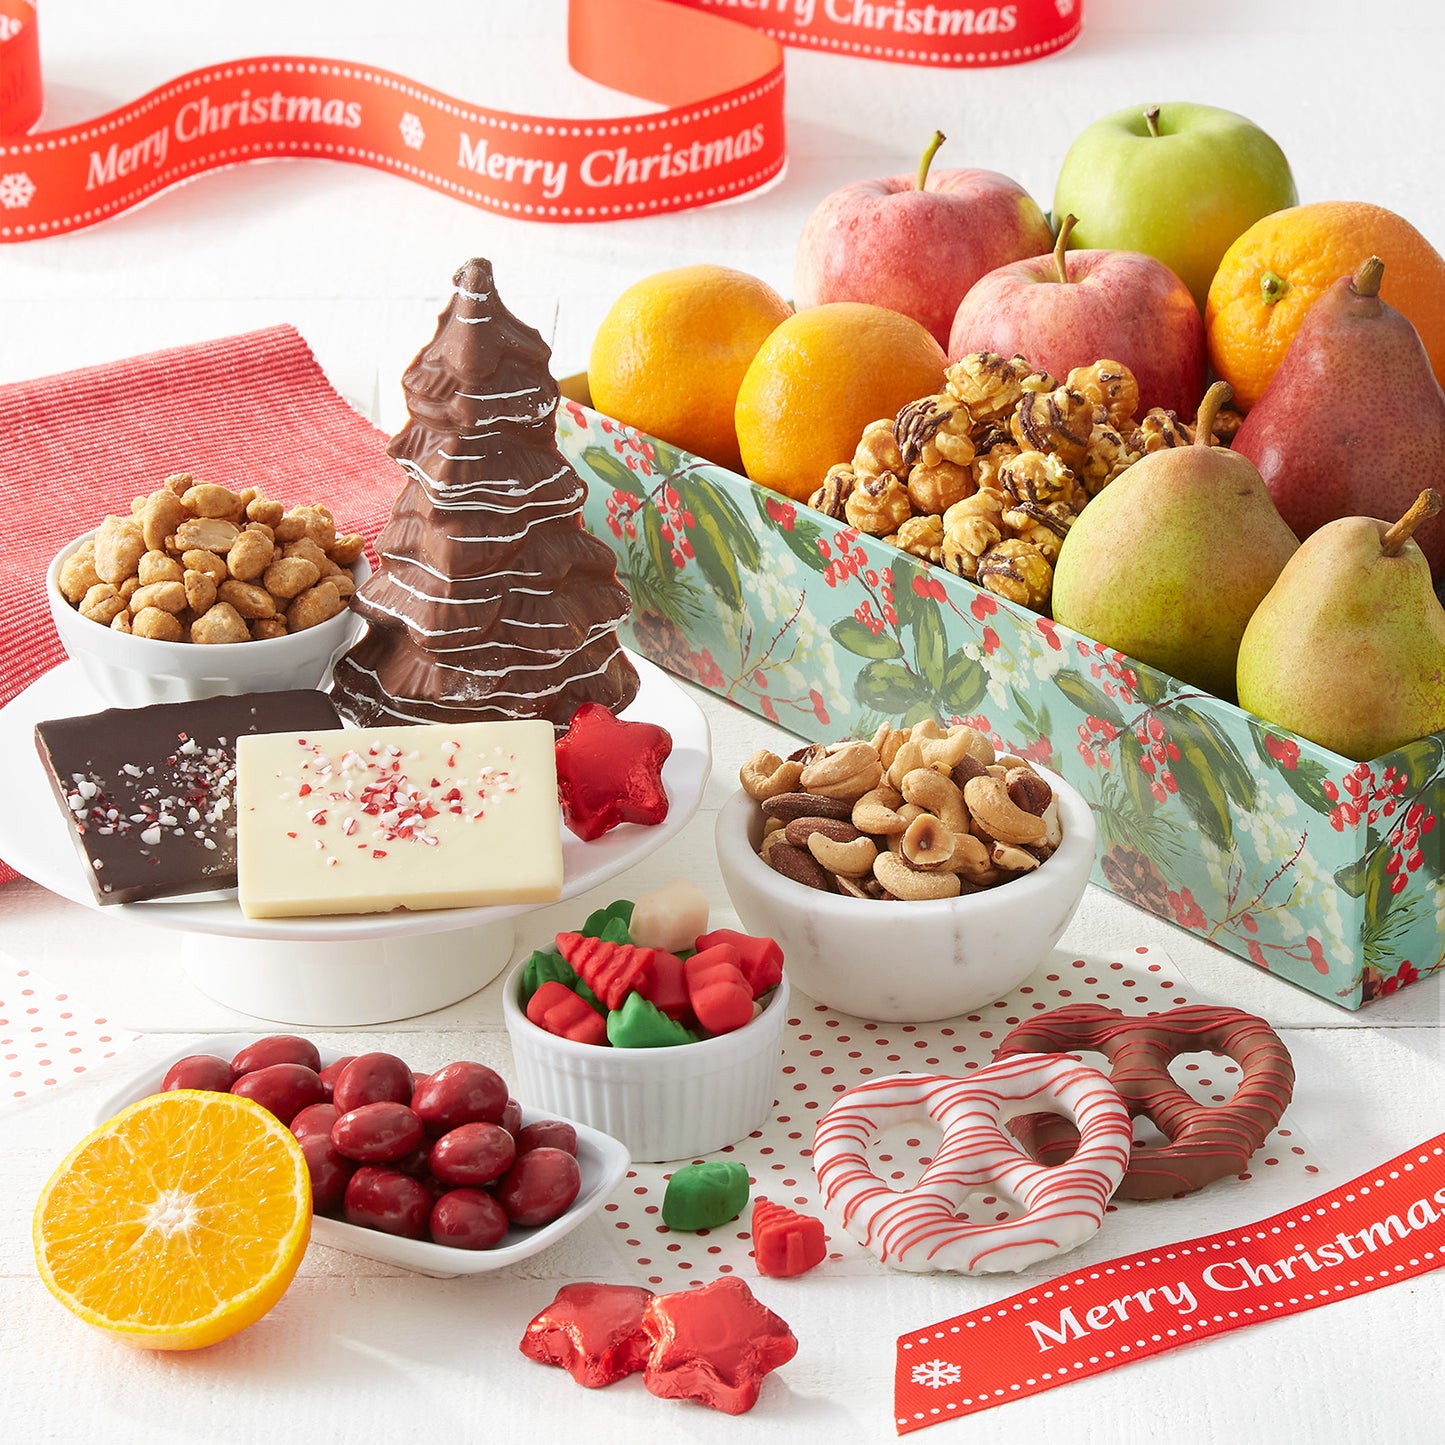 A decorated holiday crate filled with an assortment of fruit, nuts, popcorn, chocolate-covered pretzels, candy, and chocolate.